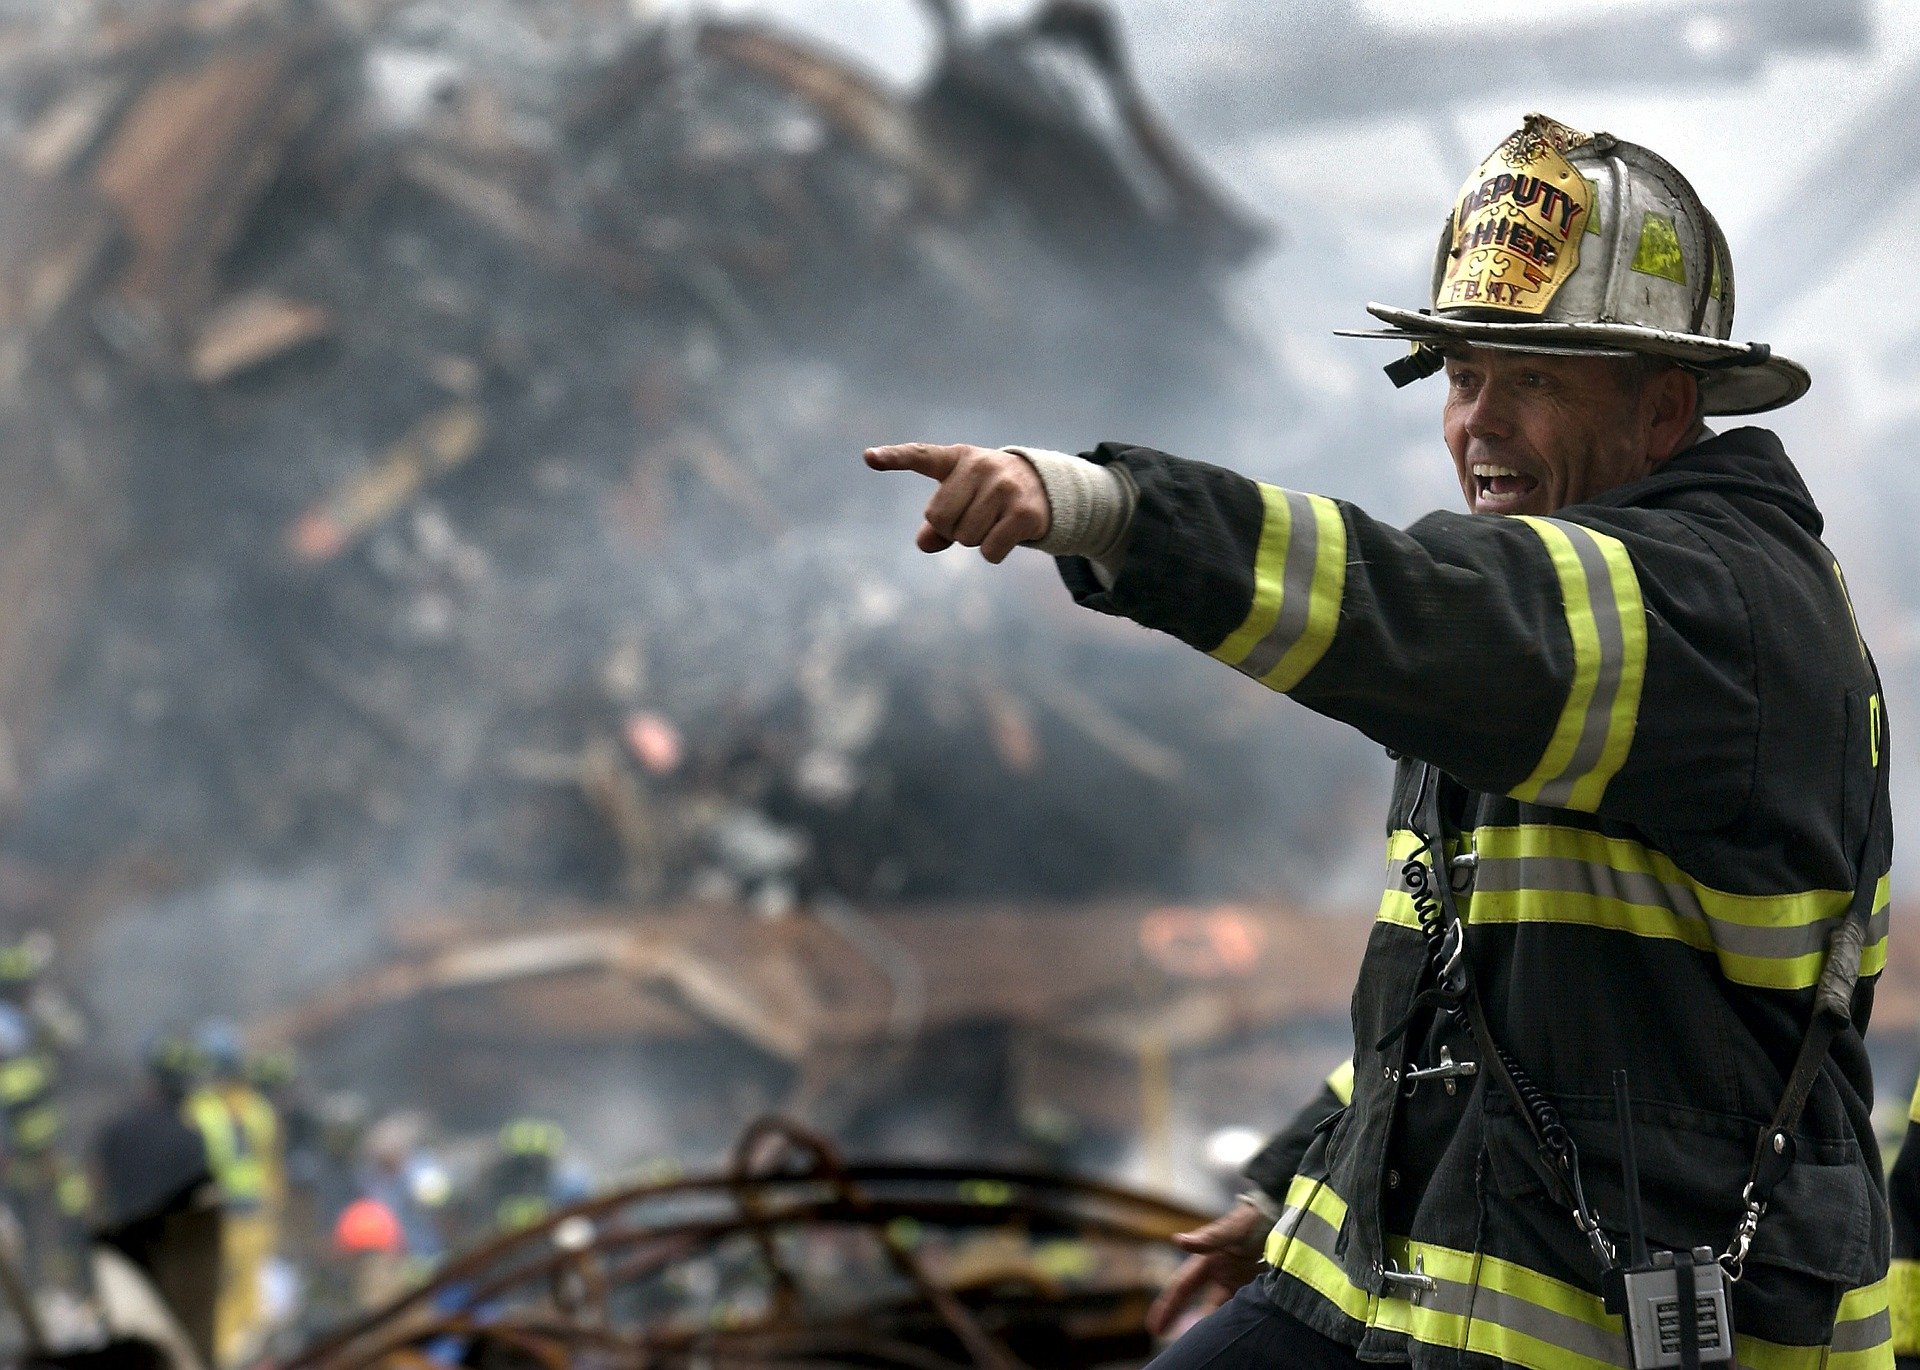 Firefighter during a 911 disaster | Source: Pixabay